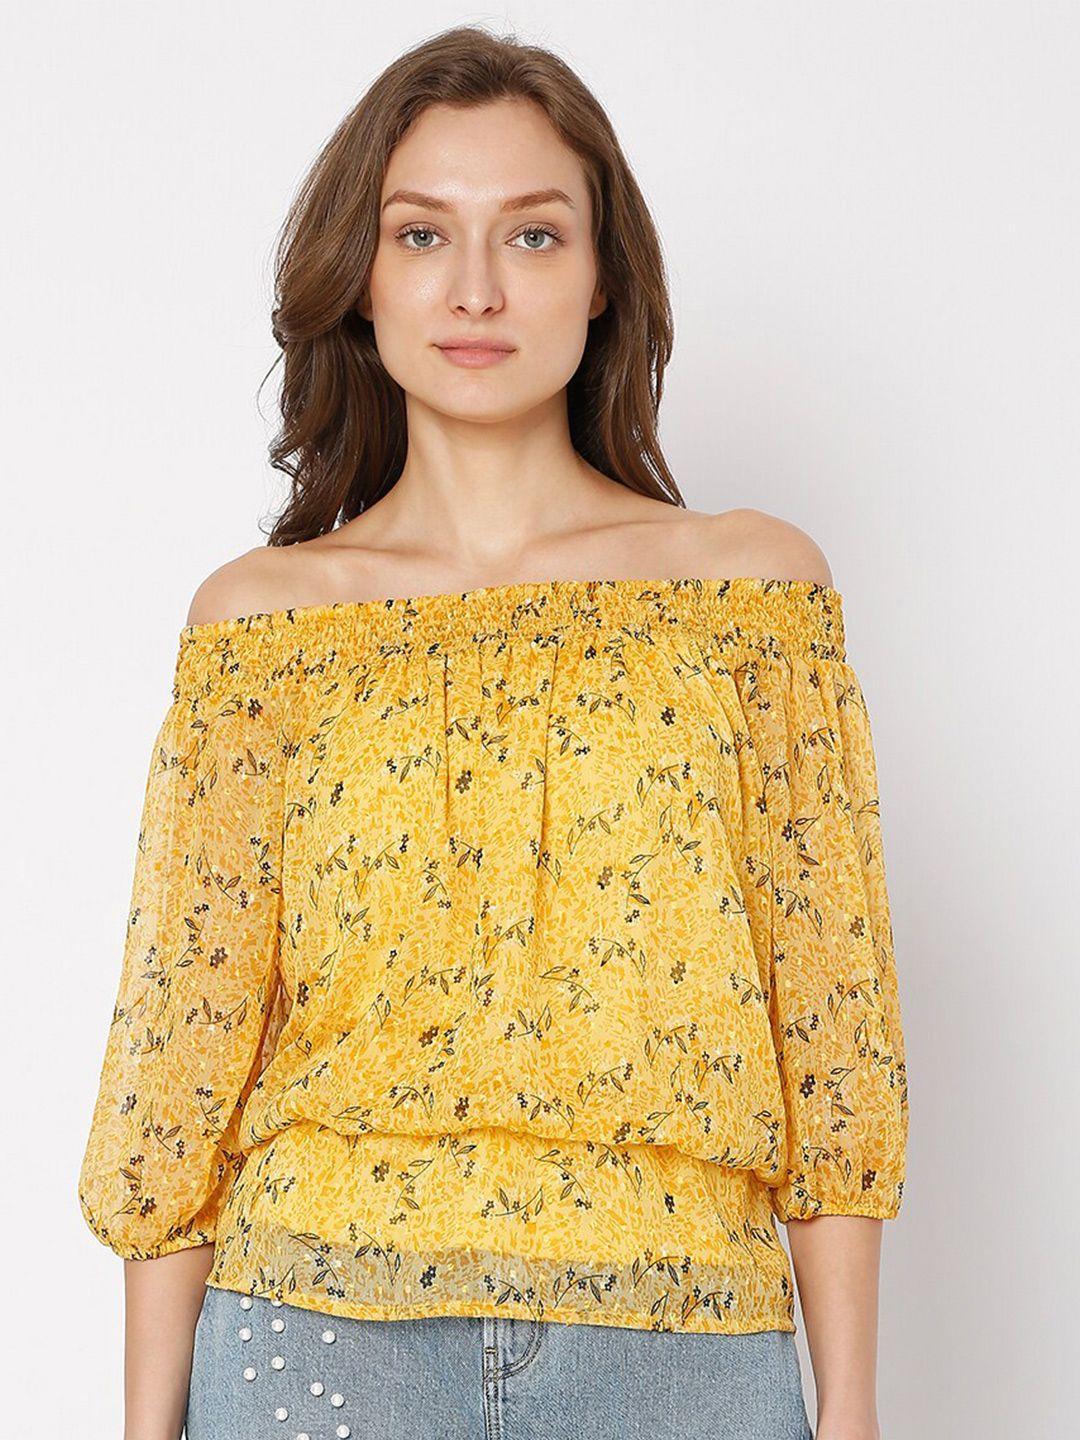 vero moda women yellow floral print off-shoulder extended sleeves top